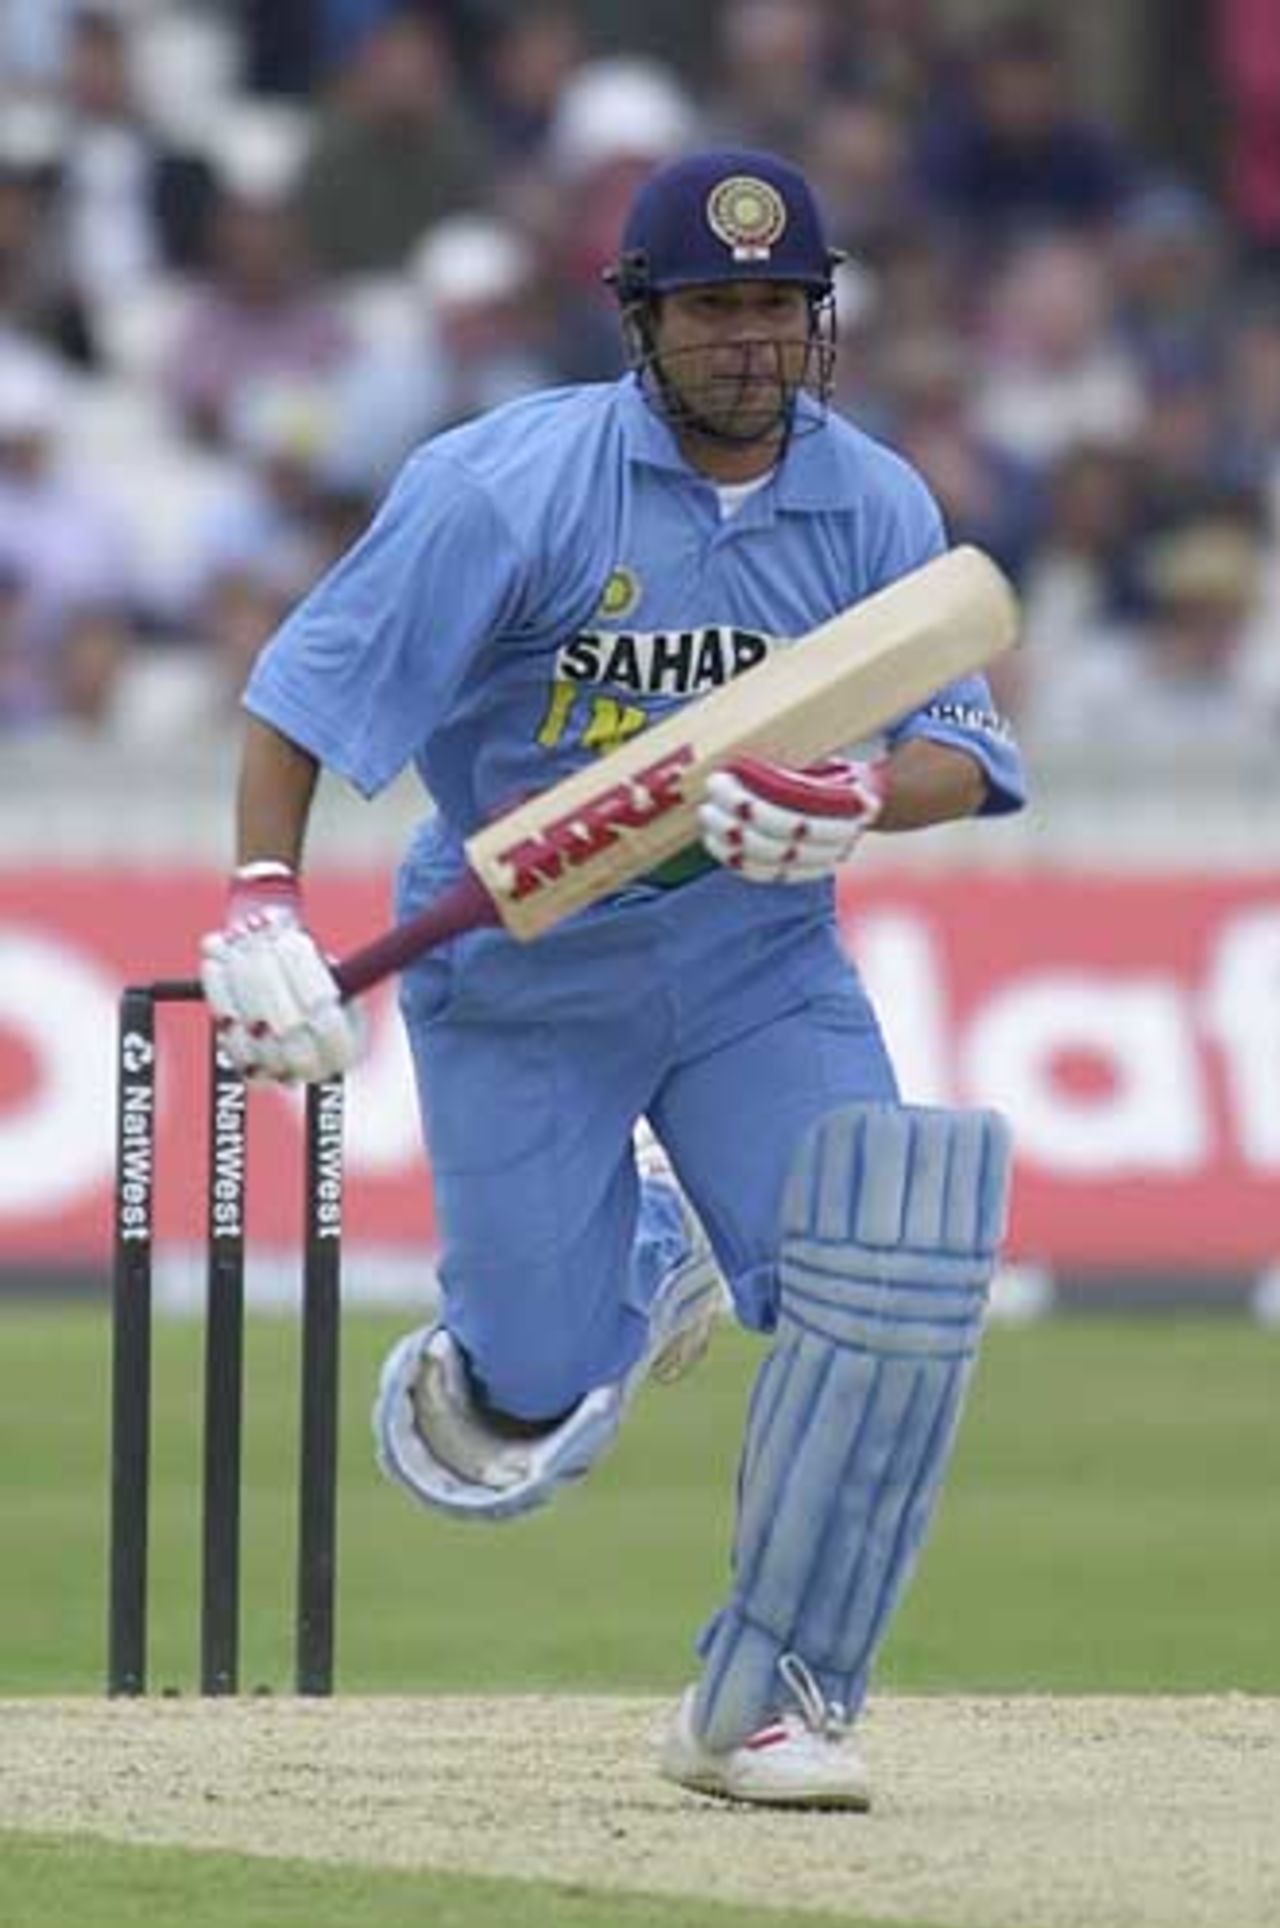 Tendulkar dashes for a quick single in the partnership with Mongia, India v Sri Lanka, NatWest Series, The Oval, 30 Jun 2002